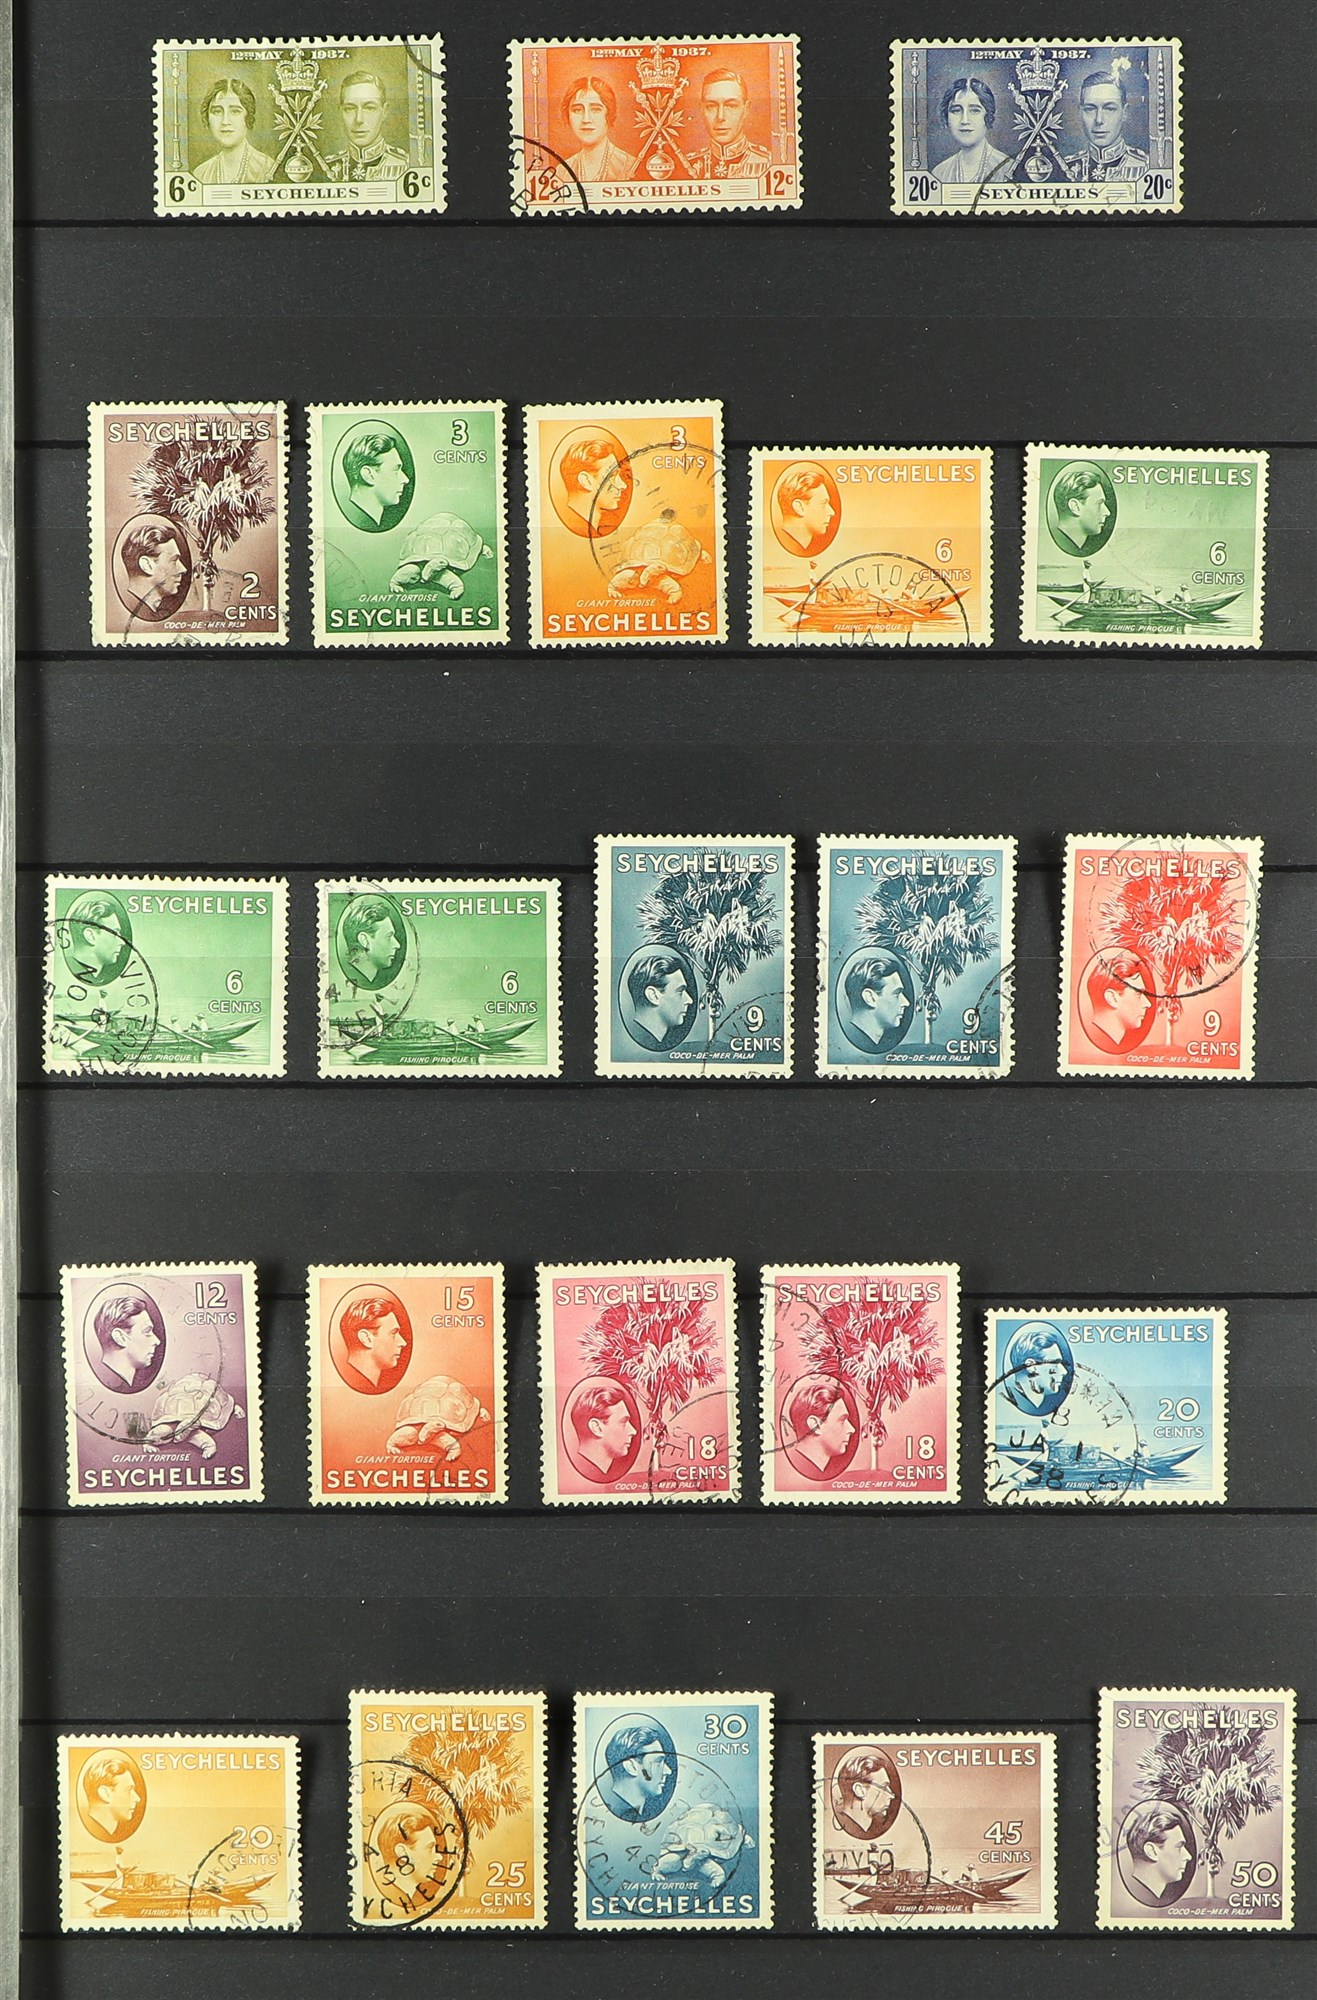 SEYCHELLES 1890 - 1952 COLLECTION of over 130 used stamps on protective pages, comprehensive incl - Image 3 of 4